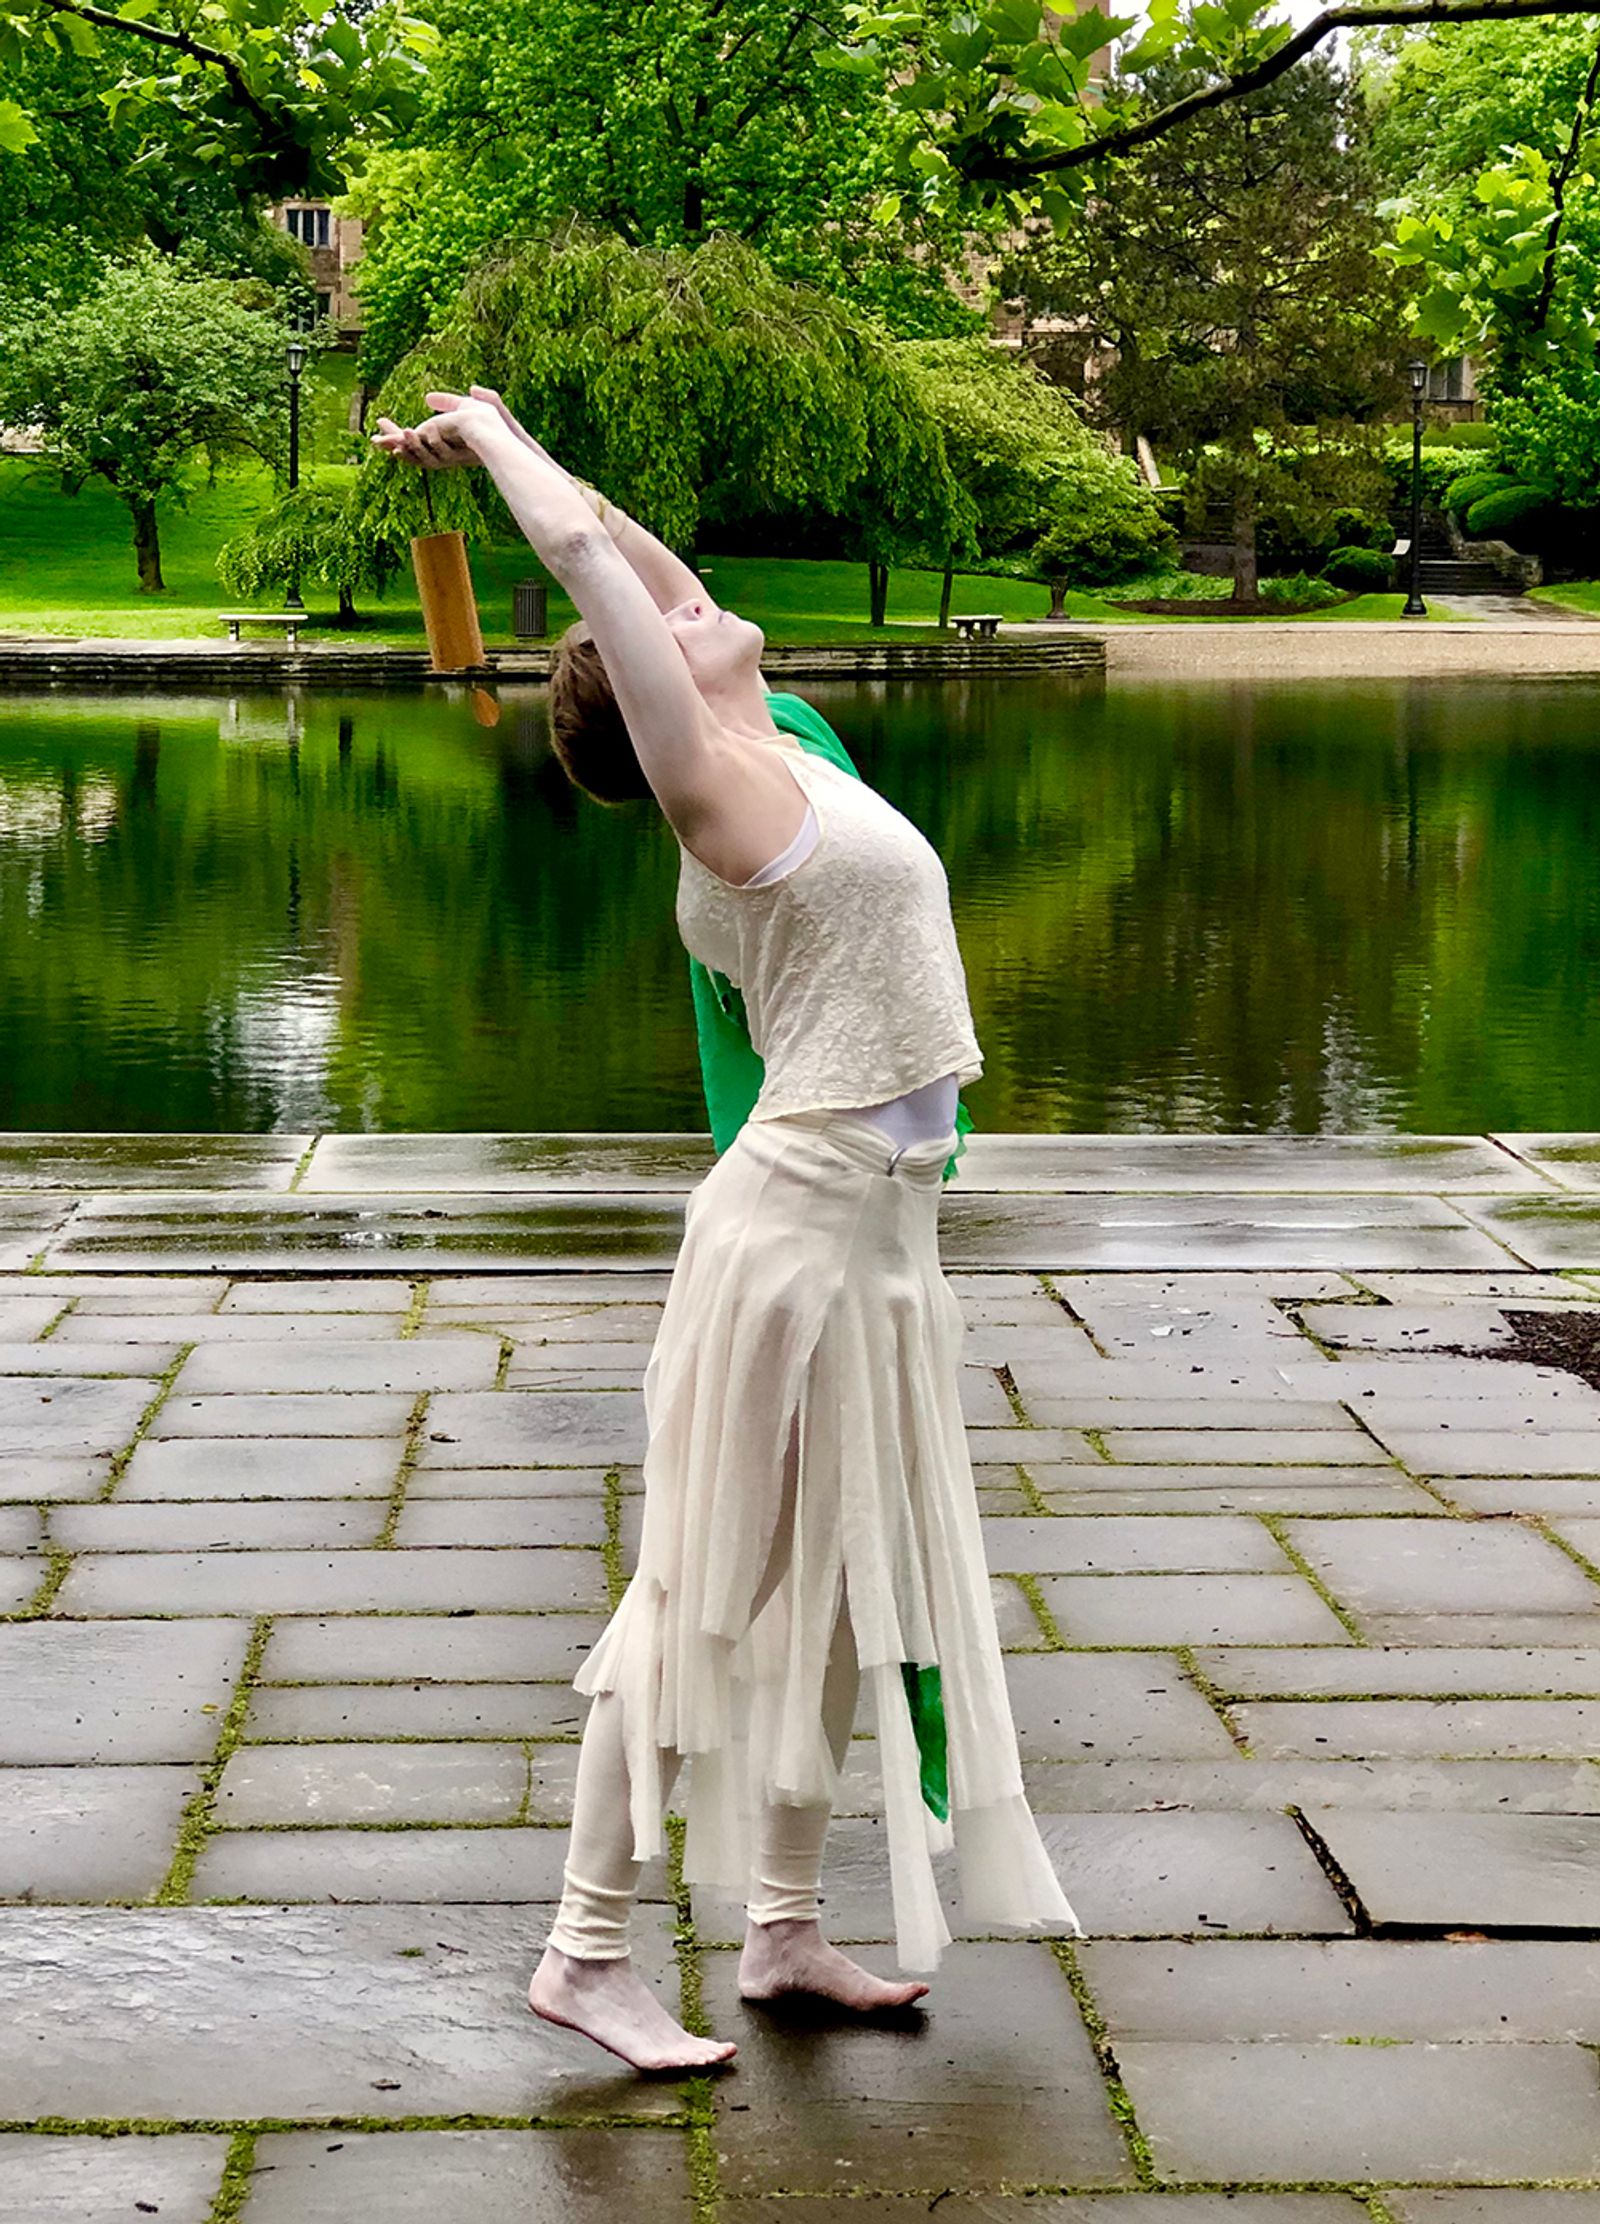 © Cynthia Penter - Image from the In Motion and Repose: The Way of Butoh photography project